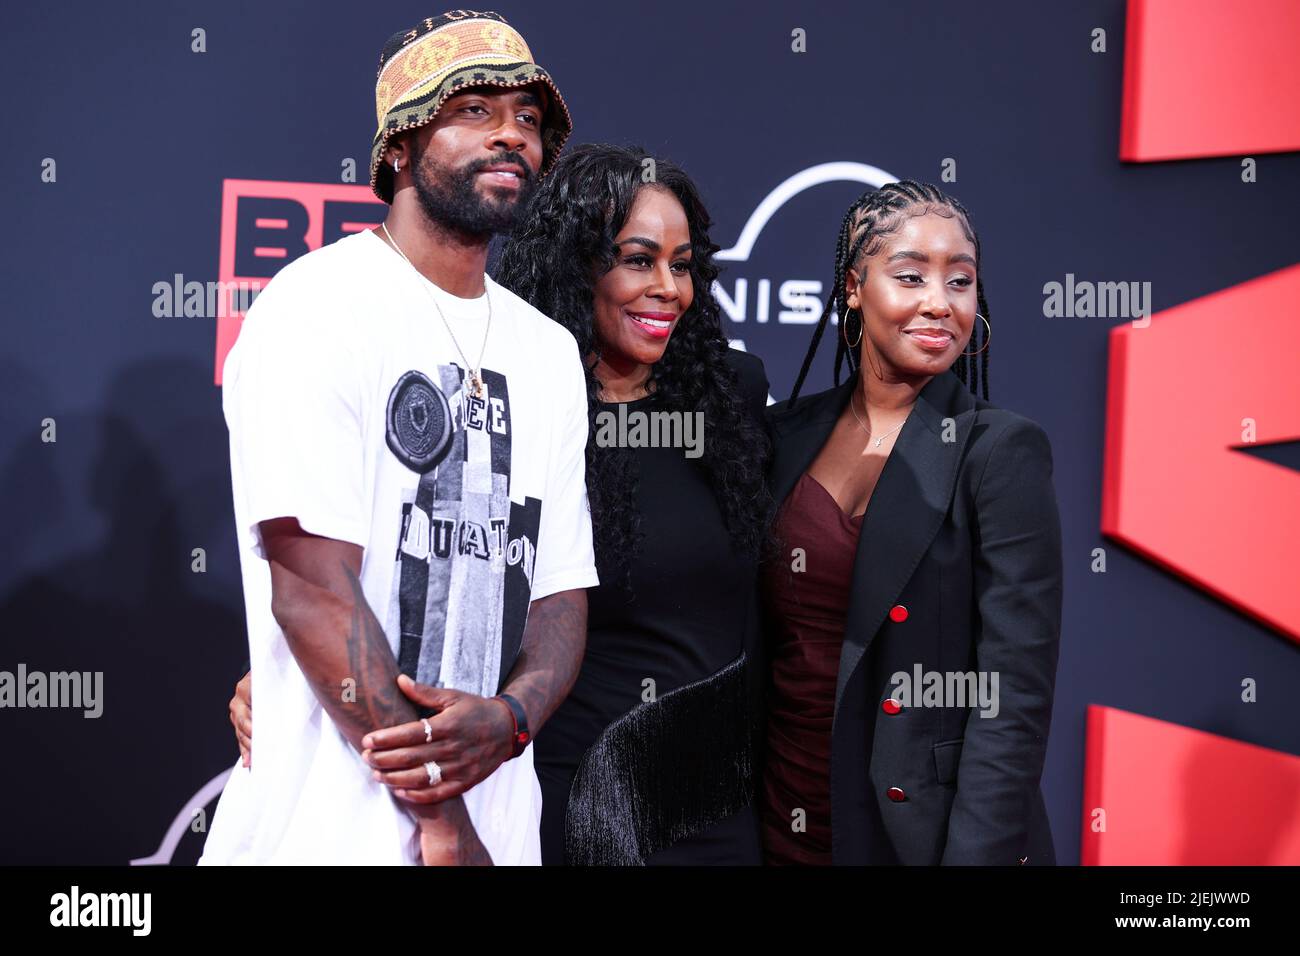 LOS ANGELES, CALIFORNIA, USA - JUNE 26: Kyrie Irving arrives at the BET Awards 2022 held at Microsoft Theater at L.A. Live on June 26, 2022 in Los Angeles, California, United States. (Photo by Xavier Collin/Image Press Agency) Credit: Image Press Agency/Alamy Live News Stock Photo